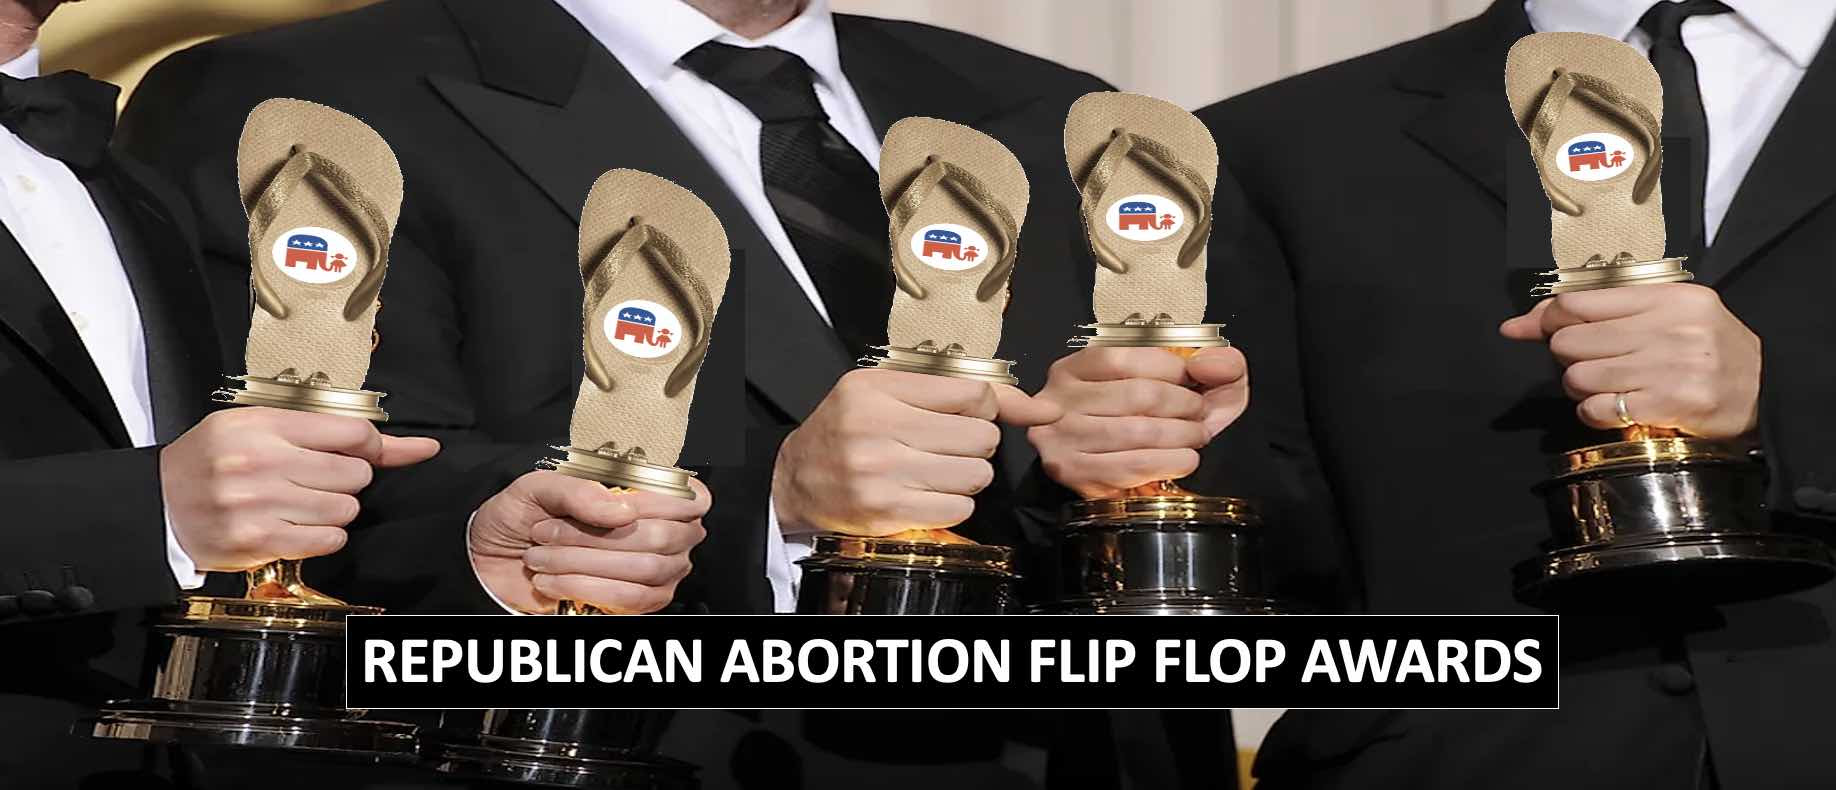 Republican Flip Flop awards recognize the hypocrisy in banning abortion and then flipping to fool voters